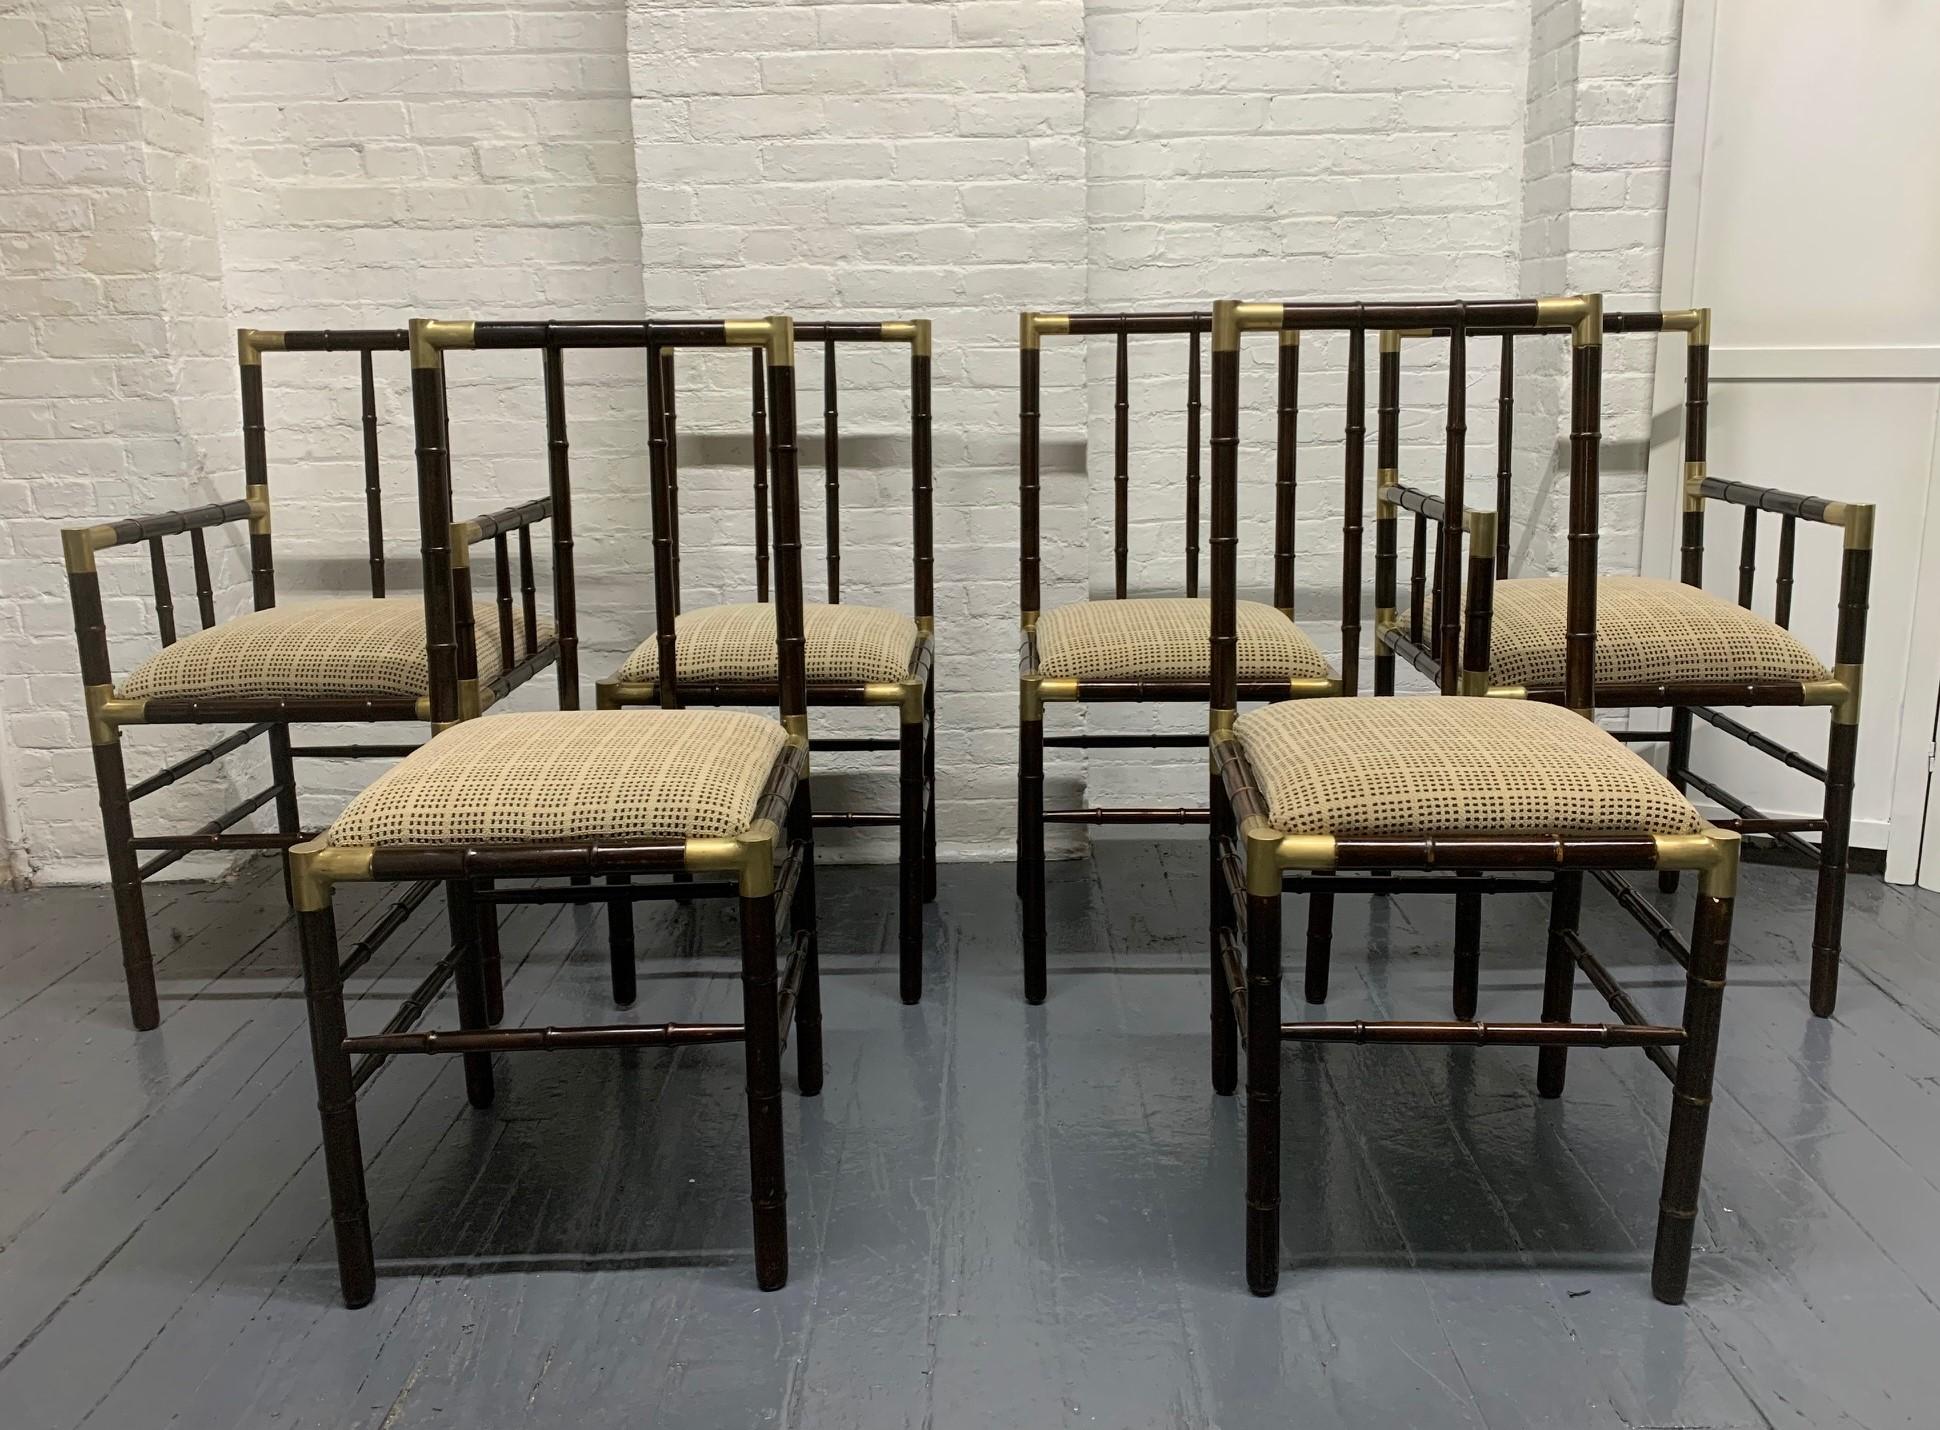 Set of 6 faux bamboo dining chairs with brass trim attributed to Billy Haines. Set contains two armchairs.
Measures: Armchairs 35.5 H x 20 W x 21 D, seat height 22
Side chairs: 36.5 H x 17 W x 18 D, seat height 20.